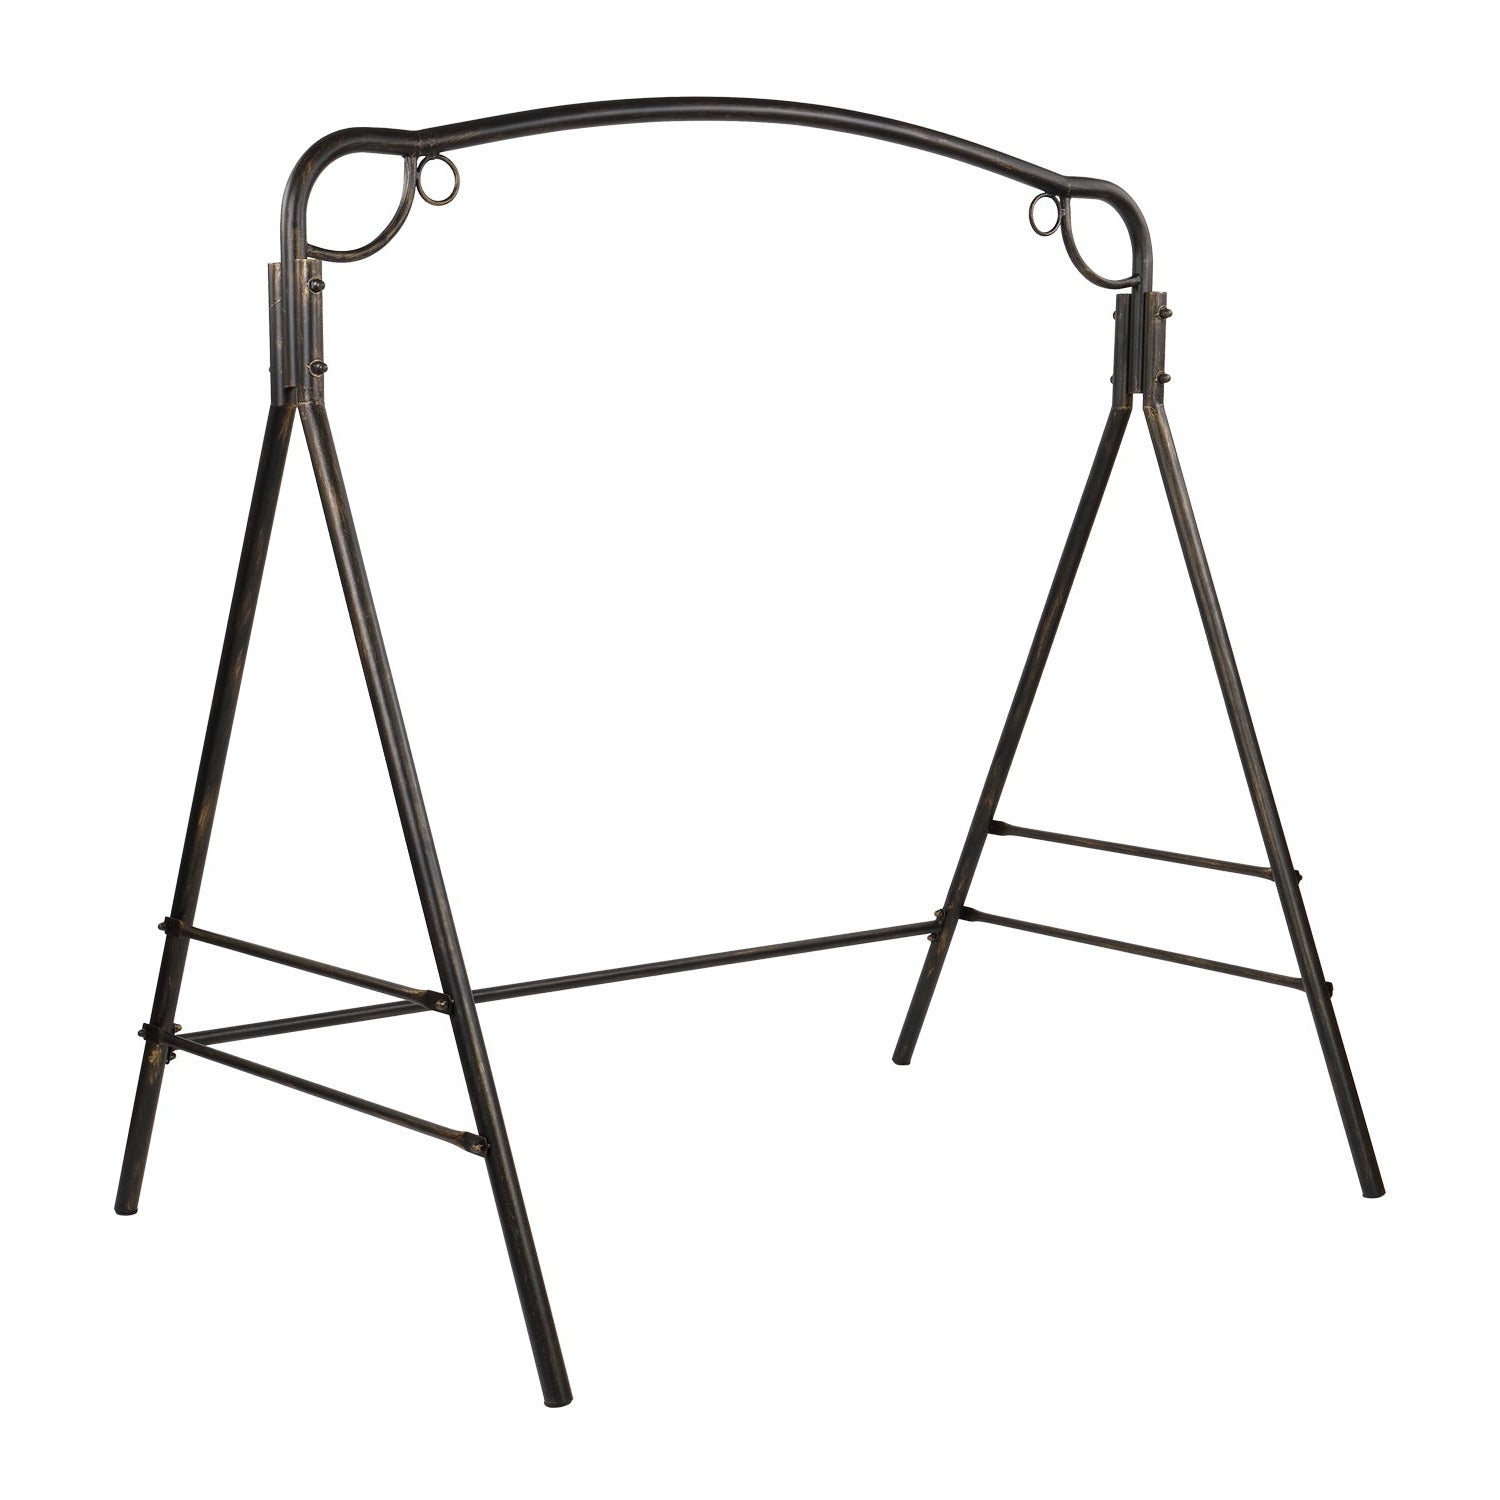 VINGLI Upgraded Metal Porch Swing Stand Antique Bronze